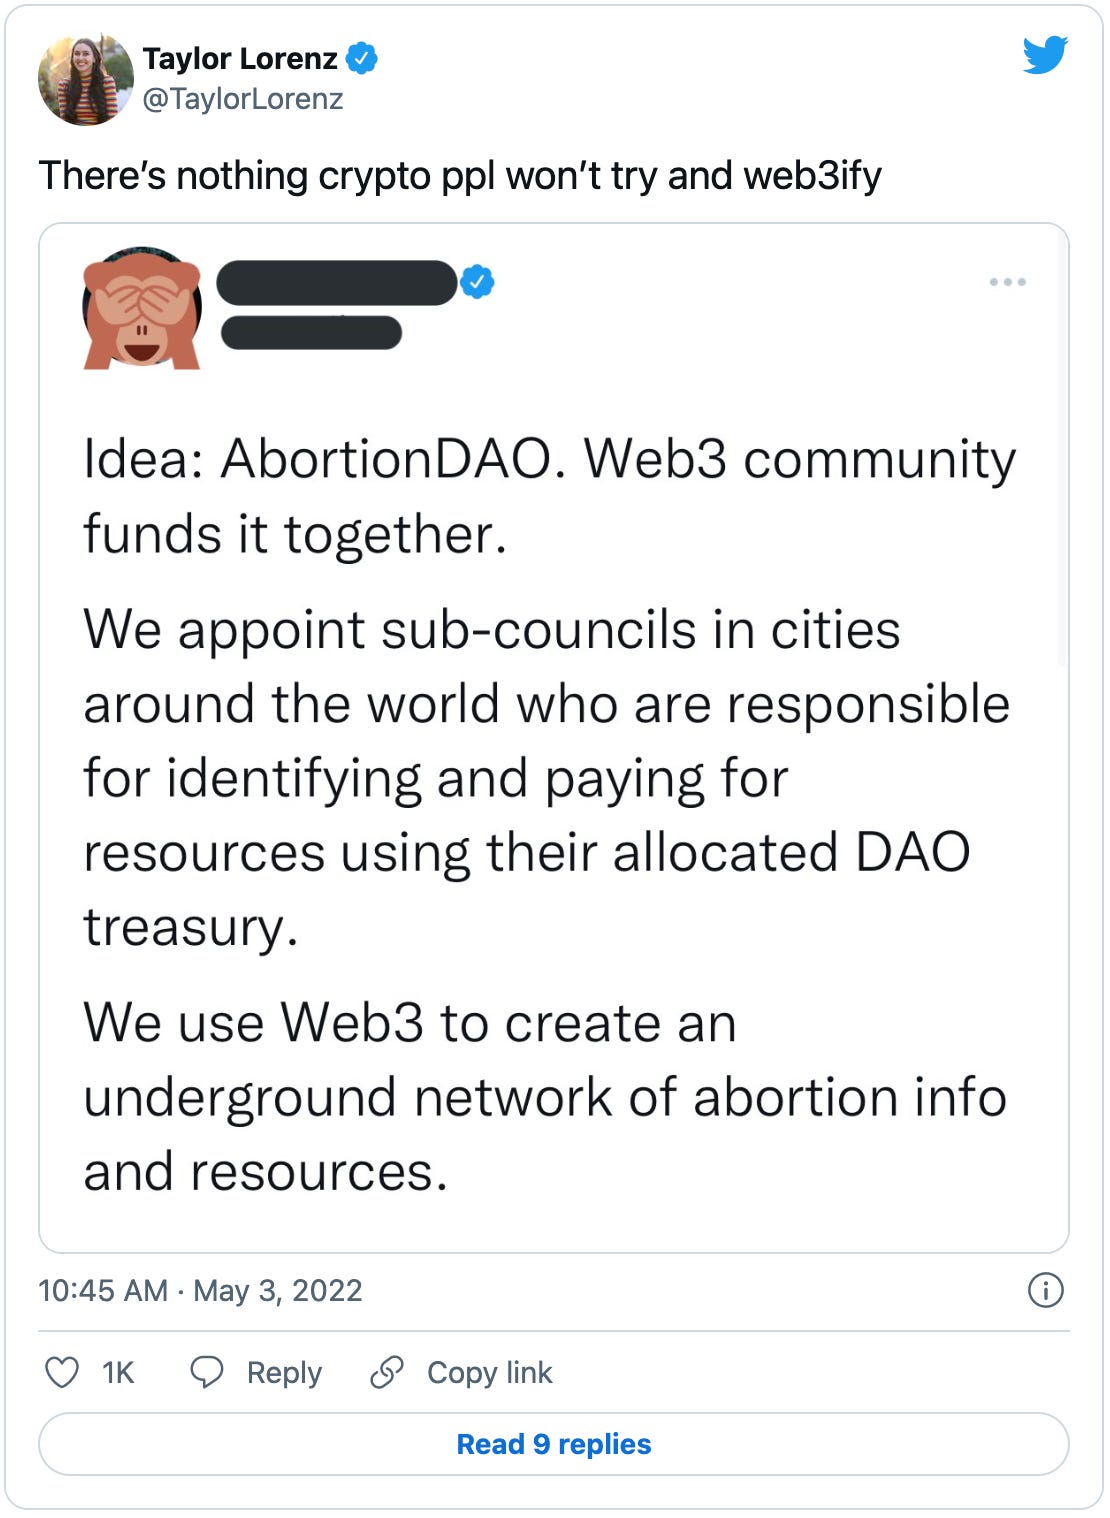 Tweet from @TaylorLorenz that says “There’s nothing crypto ppl won’t try and web3ify,” with a screenshot of another tweet reading: “Idea: AbortionDAO. Web3 community funds it together. We appoint sub-councils in cities around the world who are responsible for identifying and paying for resources using their allocated DAO treasury. We use Web3 to create an underground network of abortion info and resources.” This is, it need hardly be said, a terrible idea. 